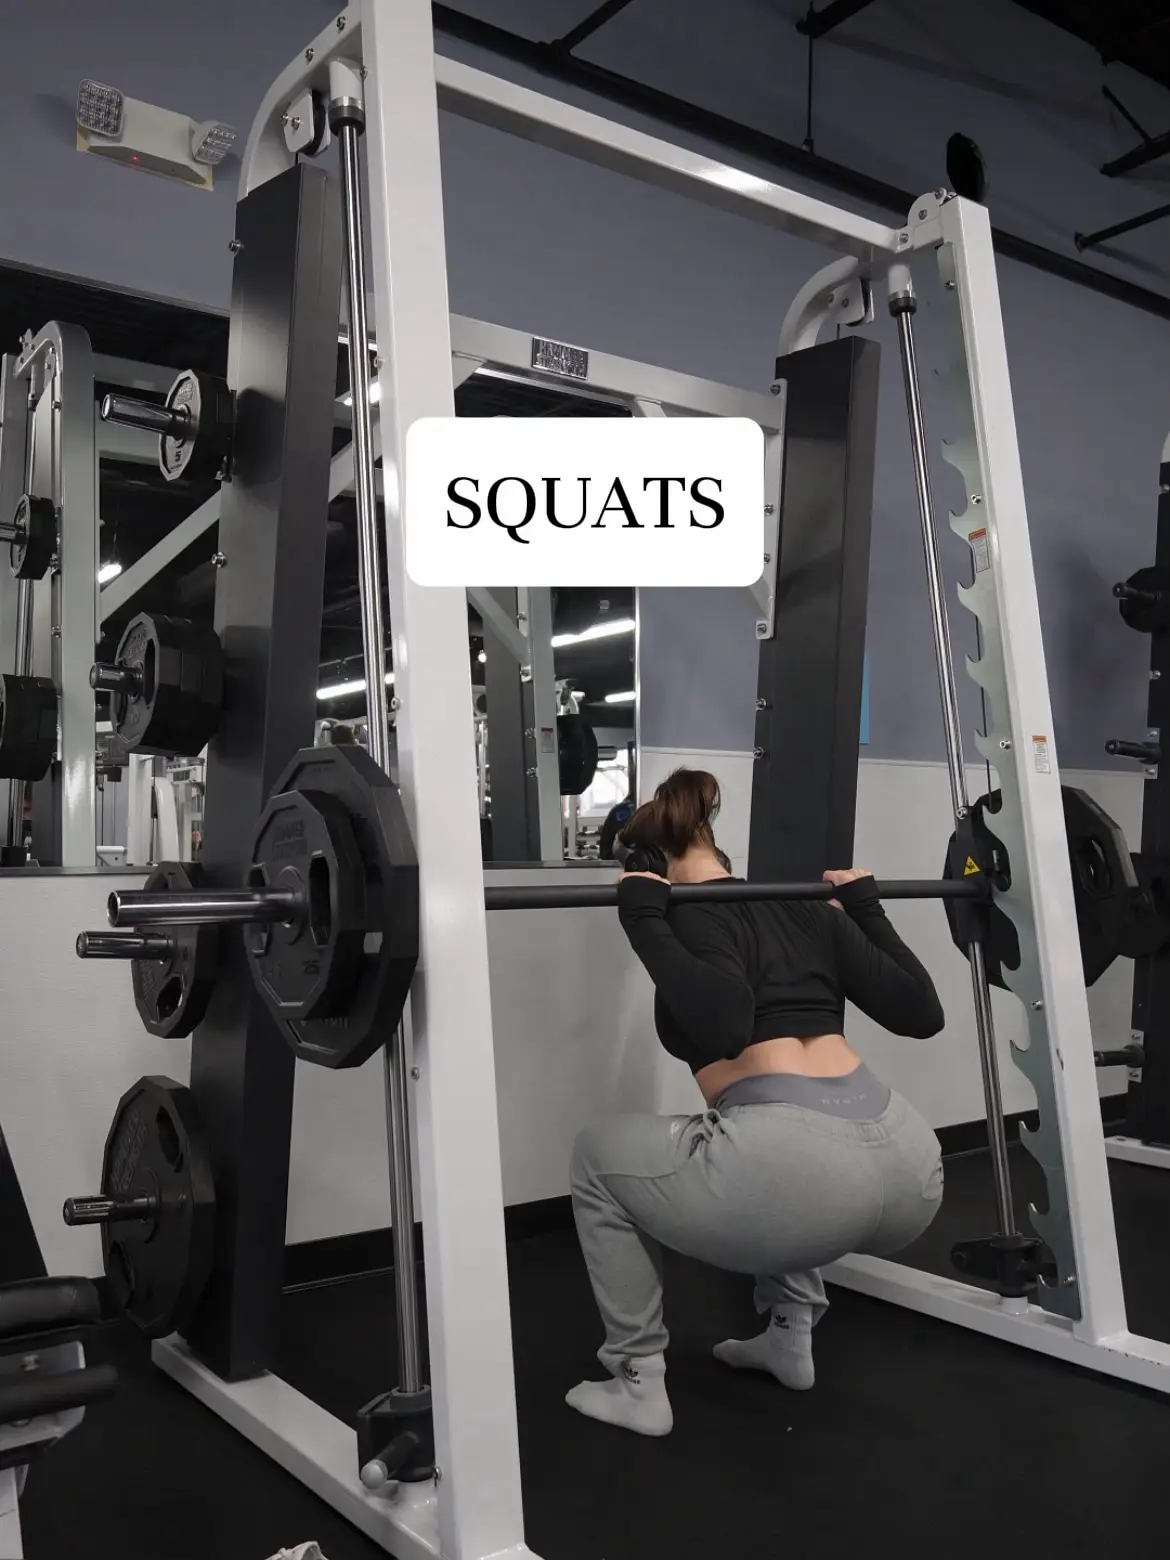 9 Best Smith Machine Glute Exercises (To Grow the Booty) - Robor Fitness